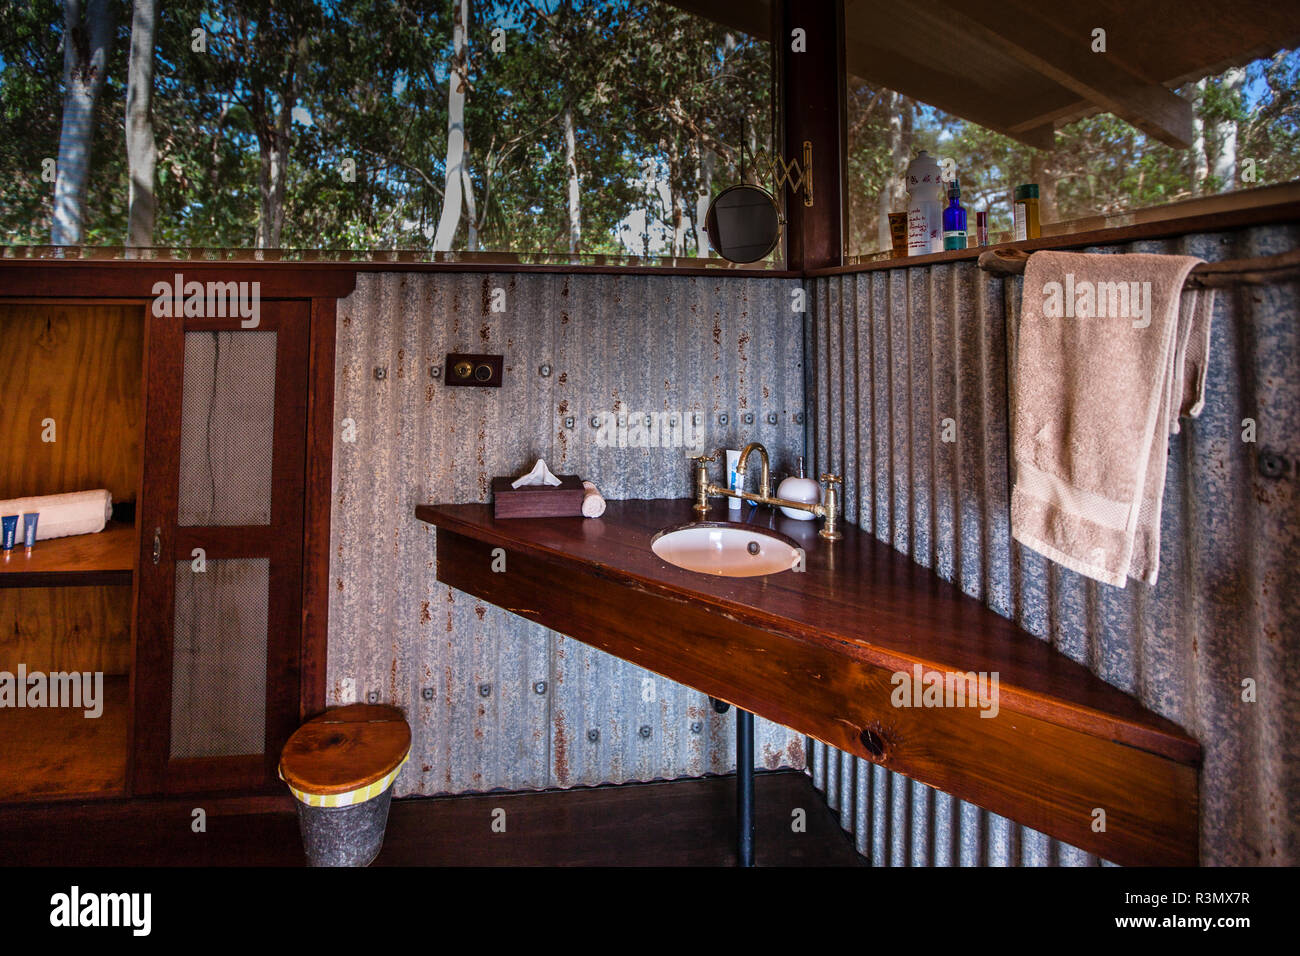 Bathroom in outback chic at Bamurru Plains Lodge Stock Photo